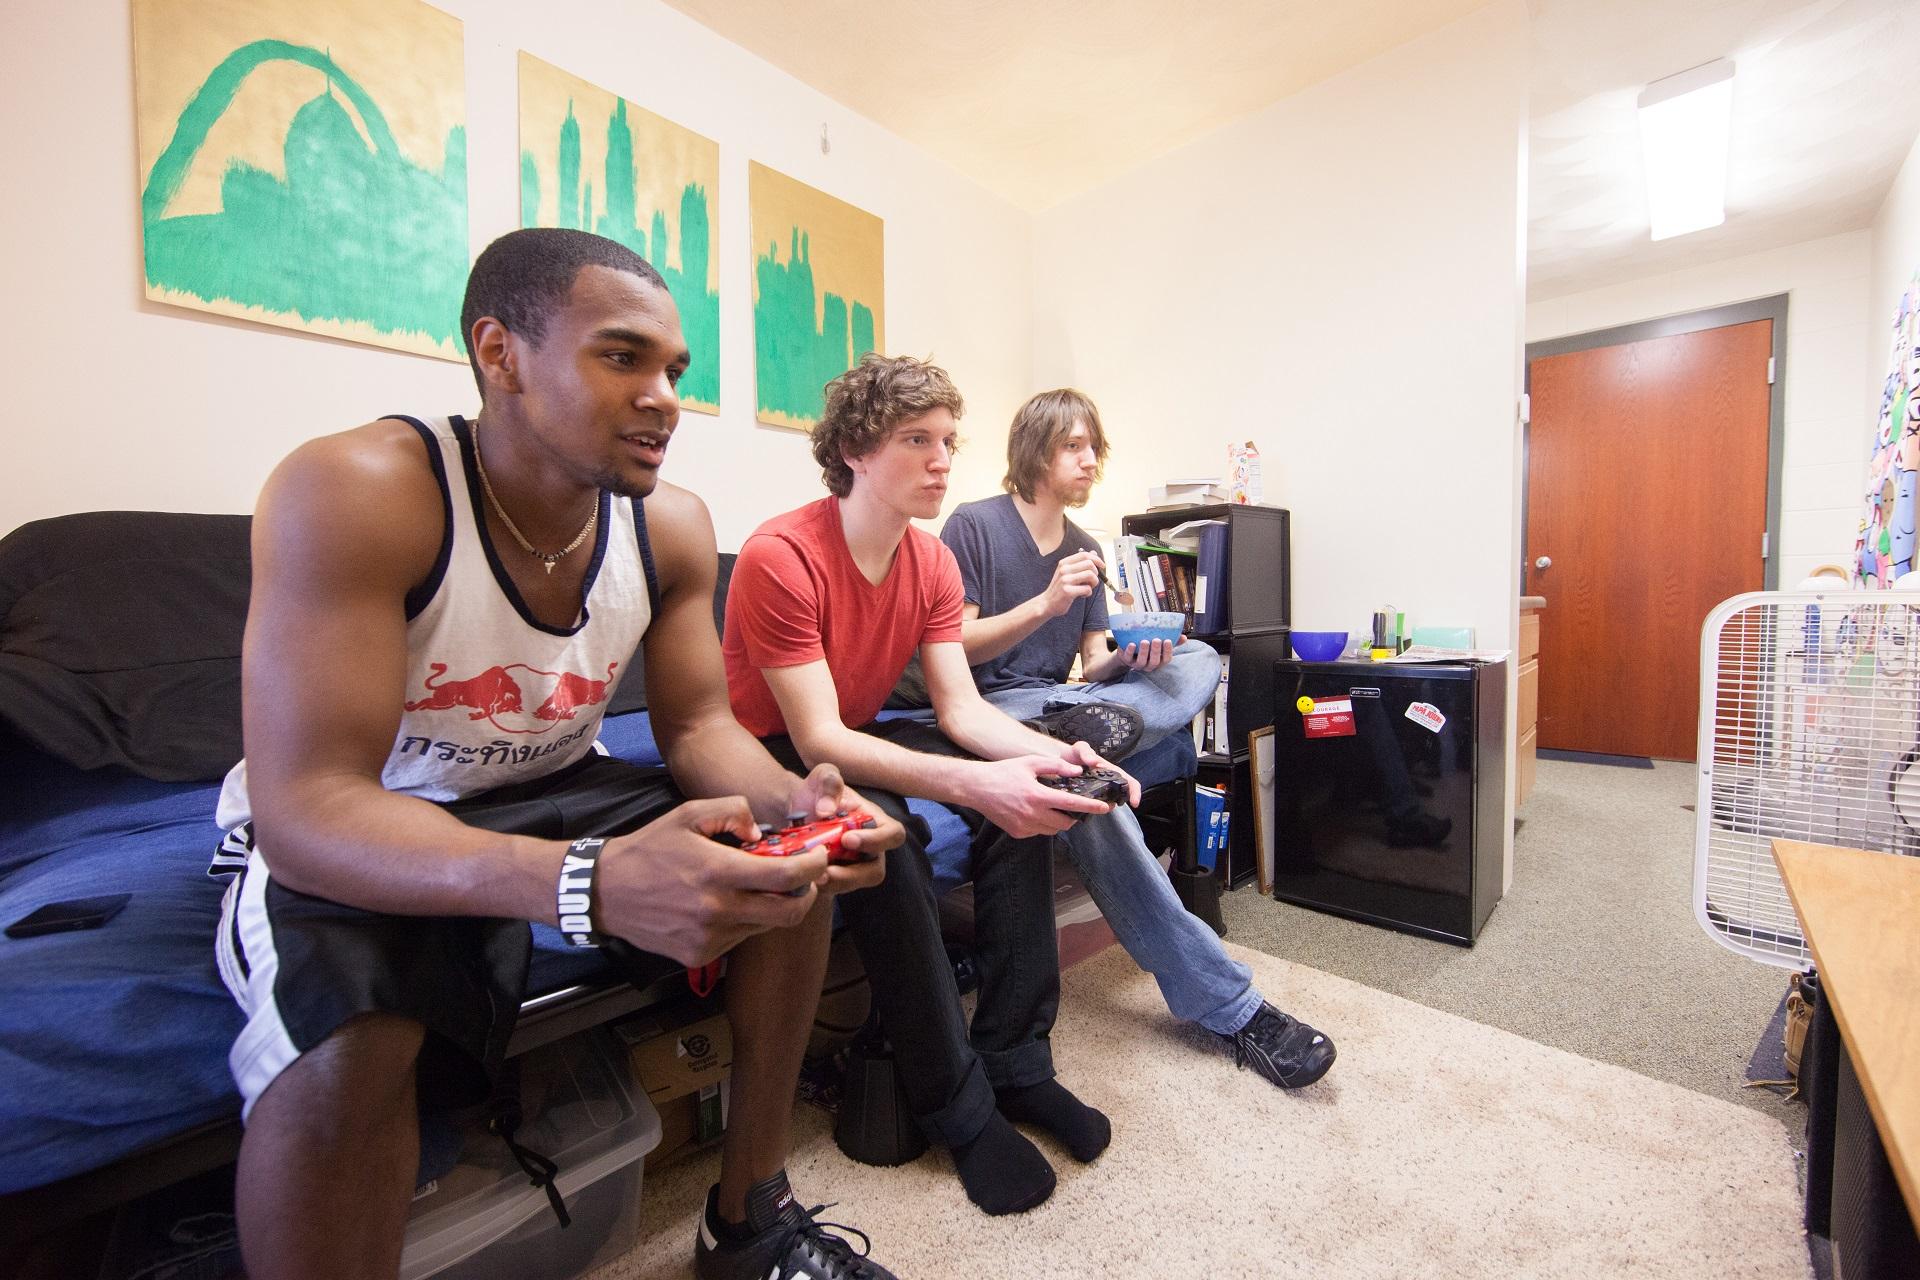 Students relaxing in a South Hall dorm room